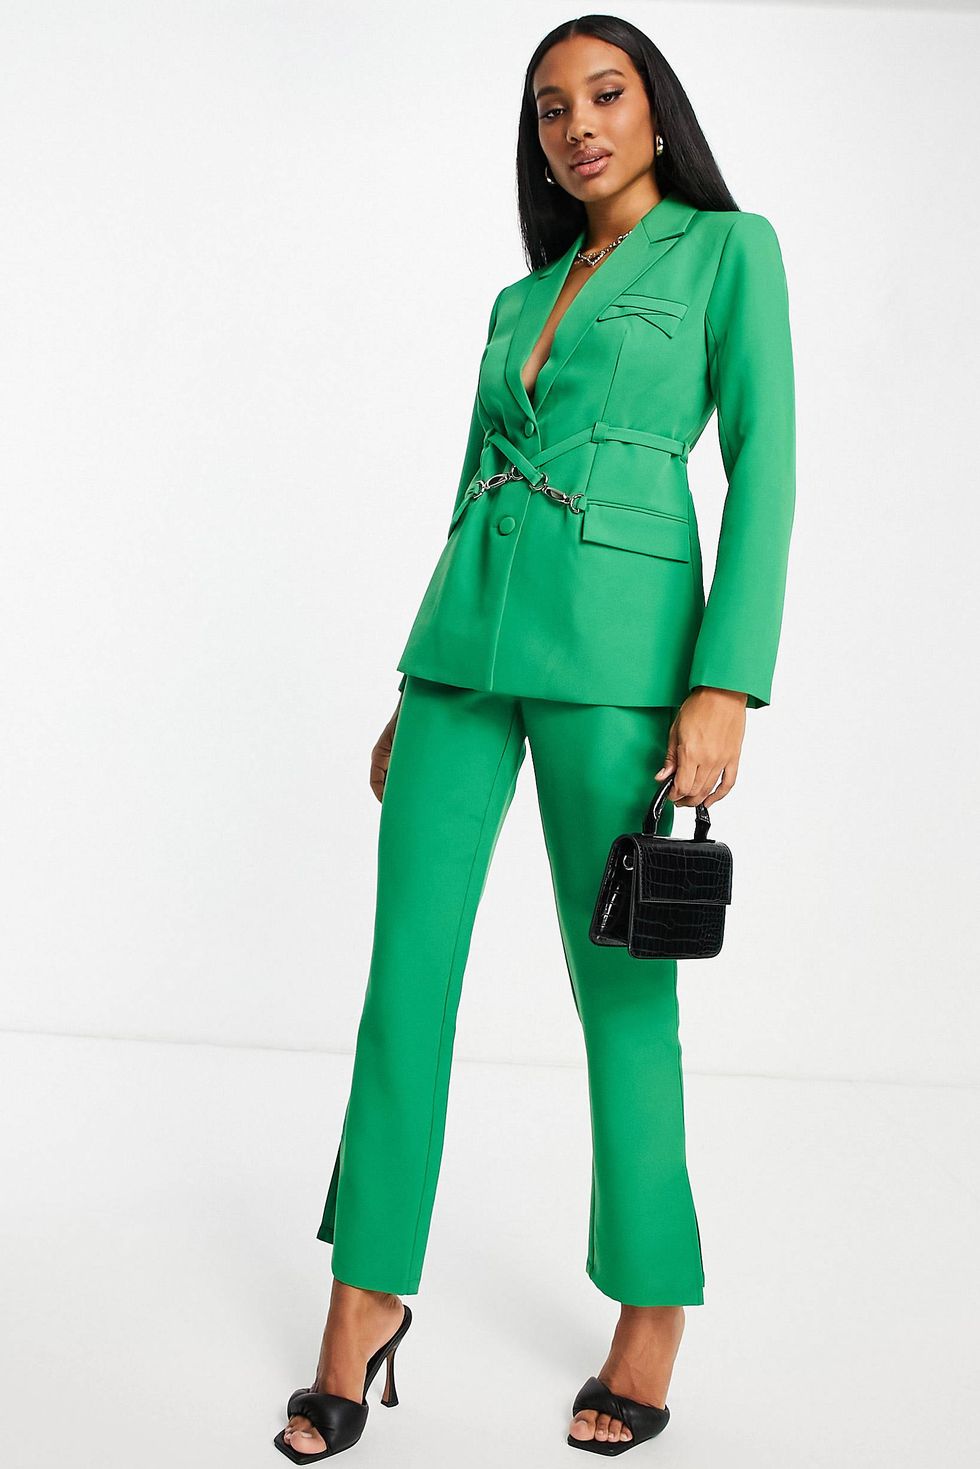 Womens Business Suit In Pinstripe Cloth For A Power Look, 45% OFF